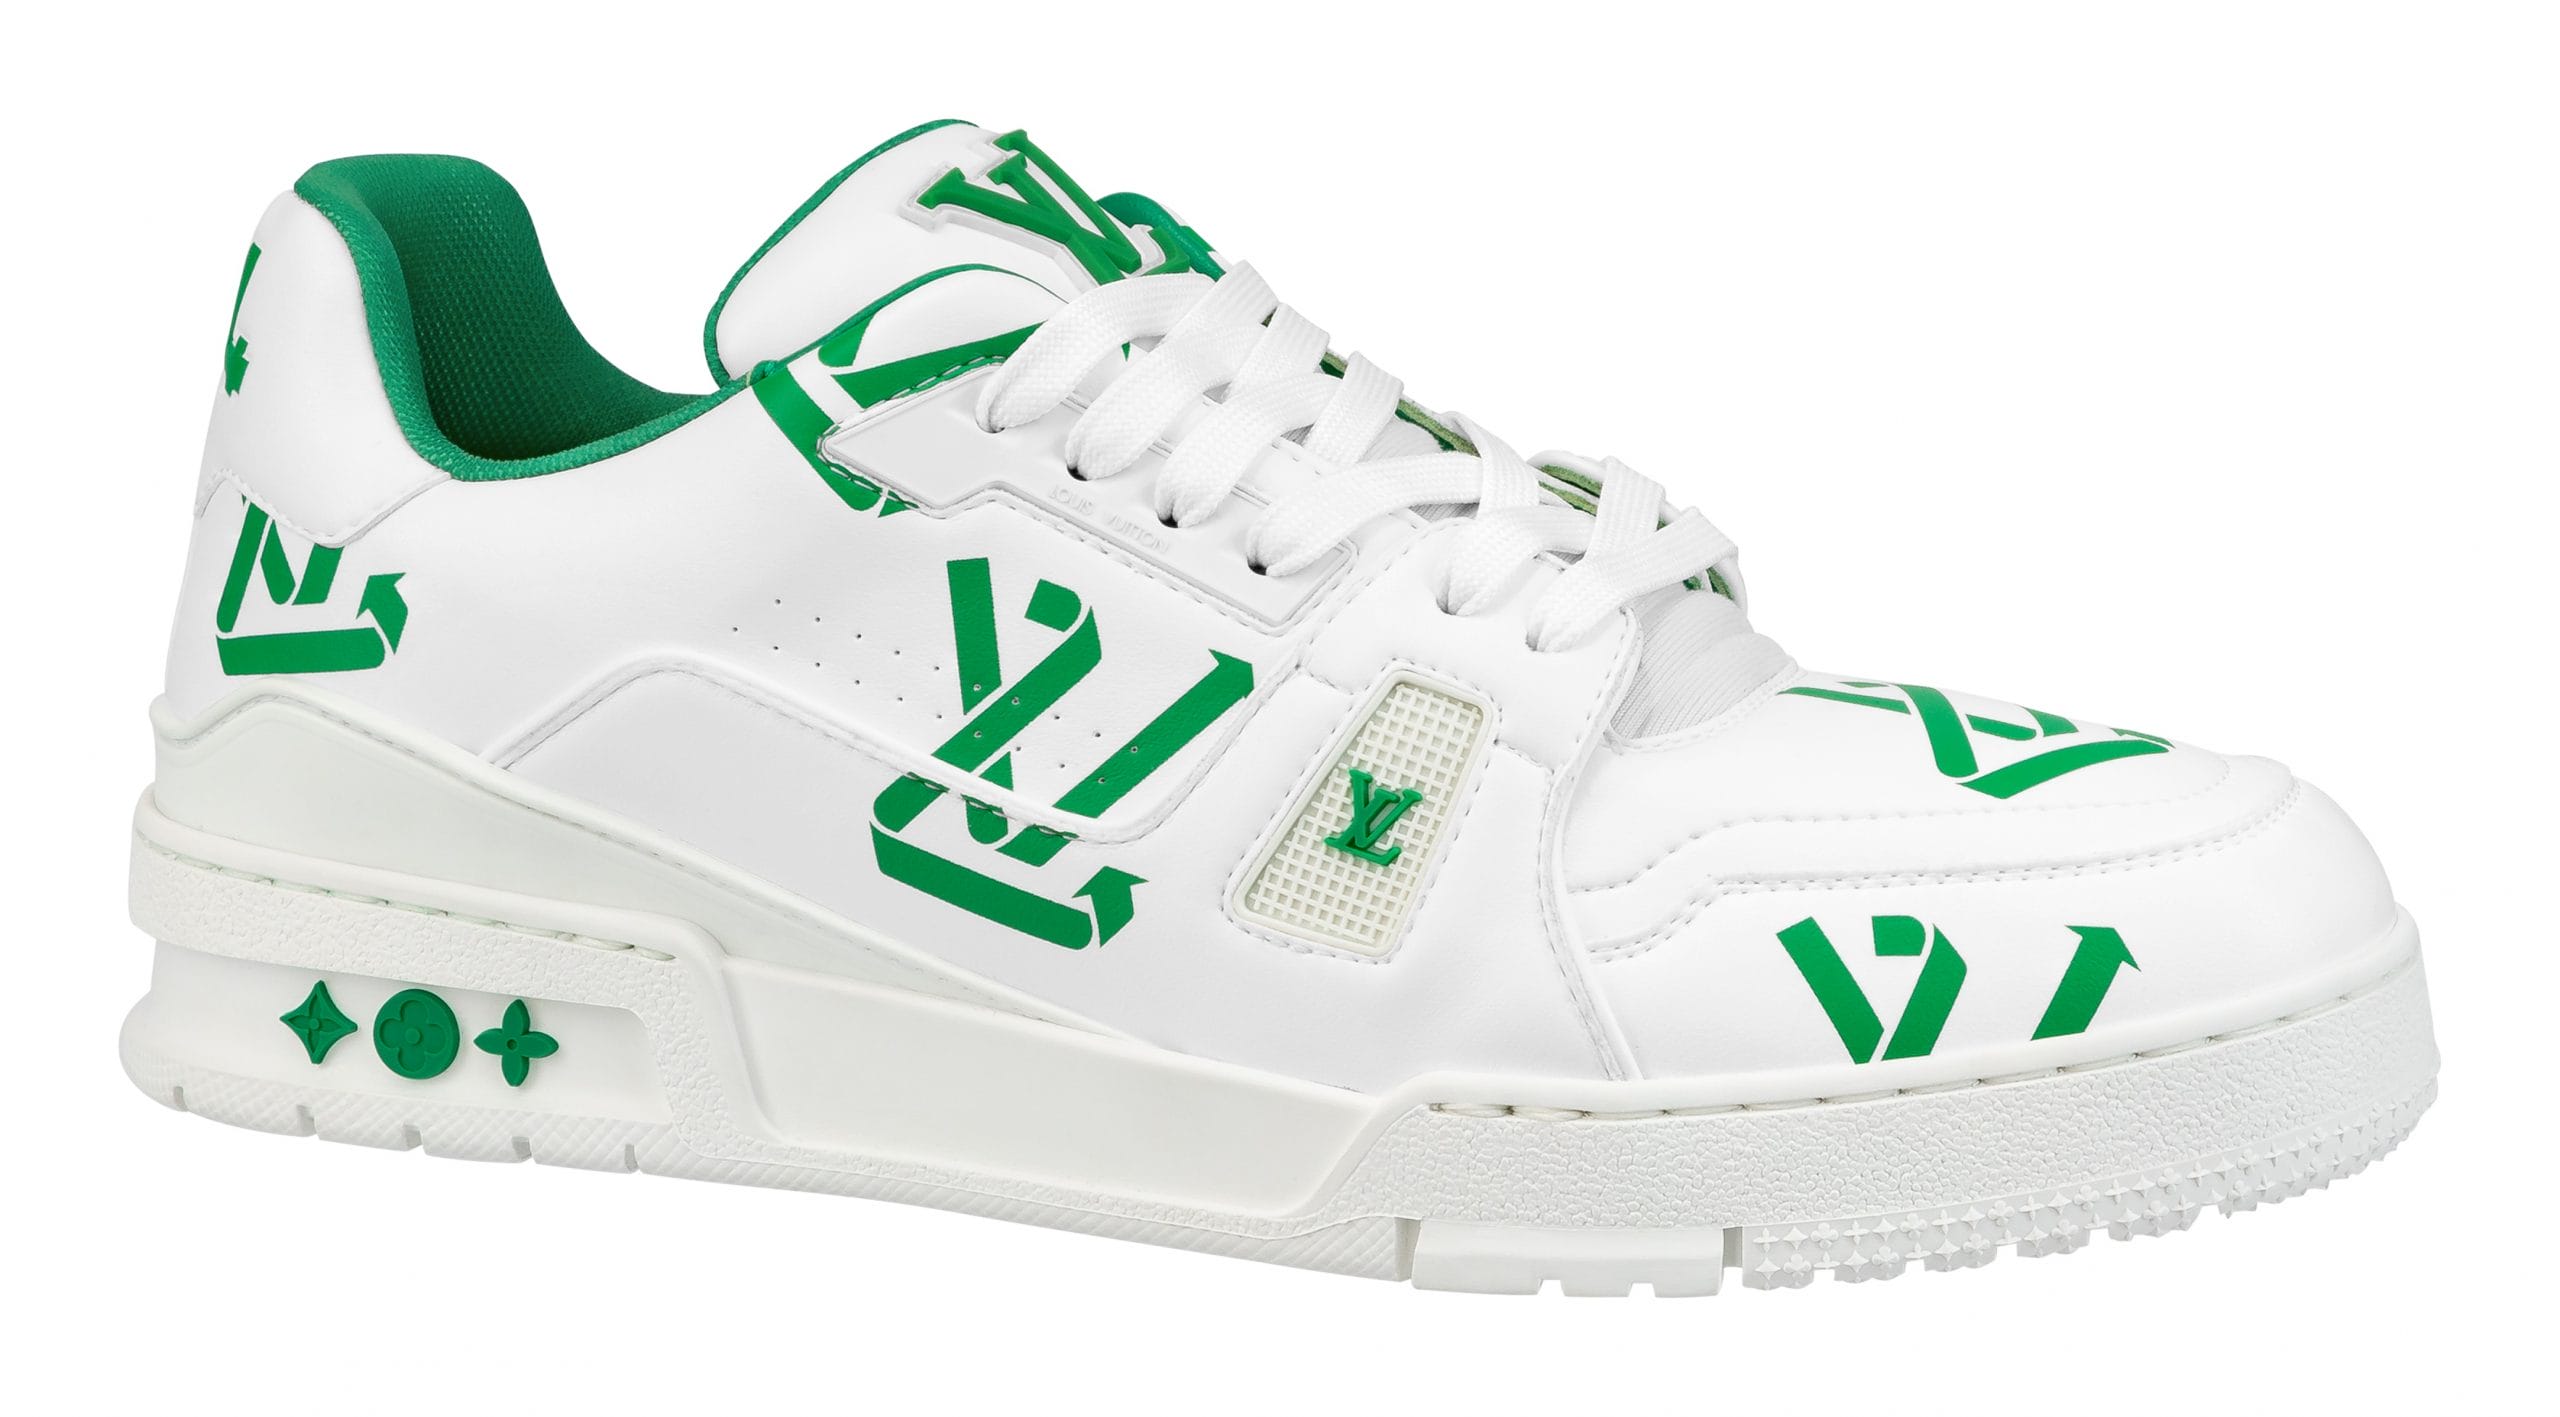 Louis Vuitton's New LV Trainers Amplify the Power of Circular